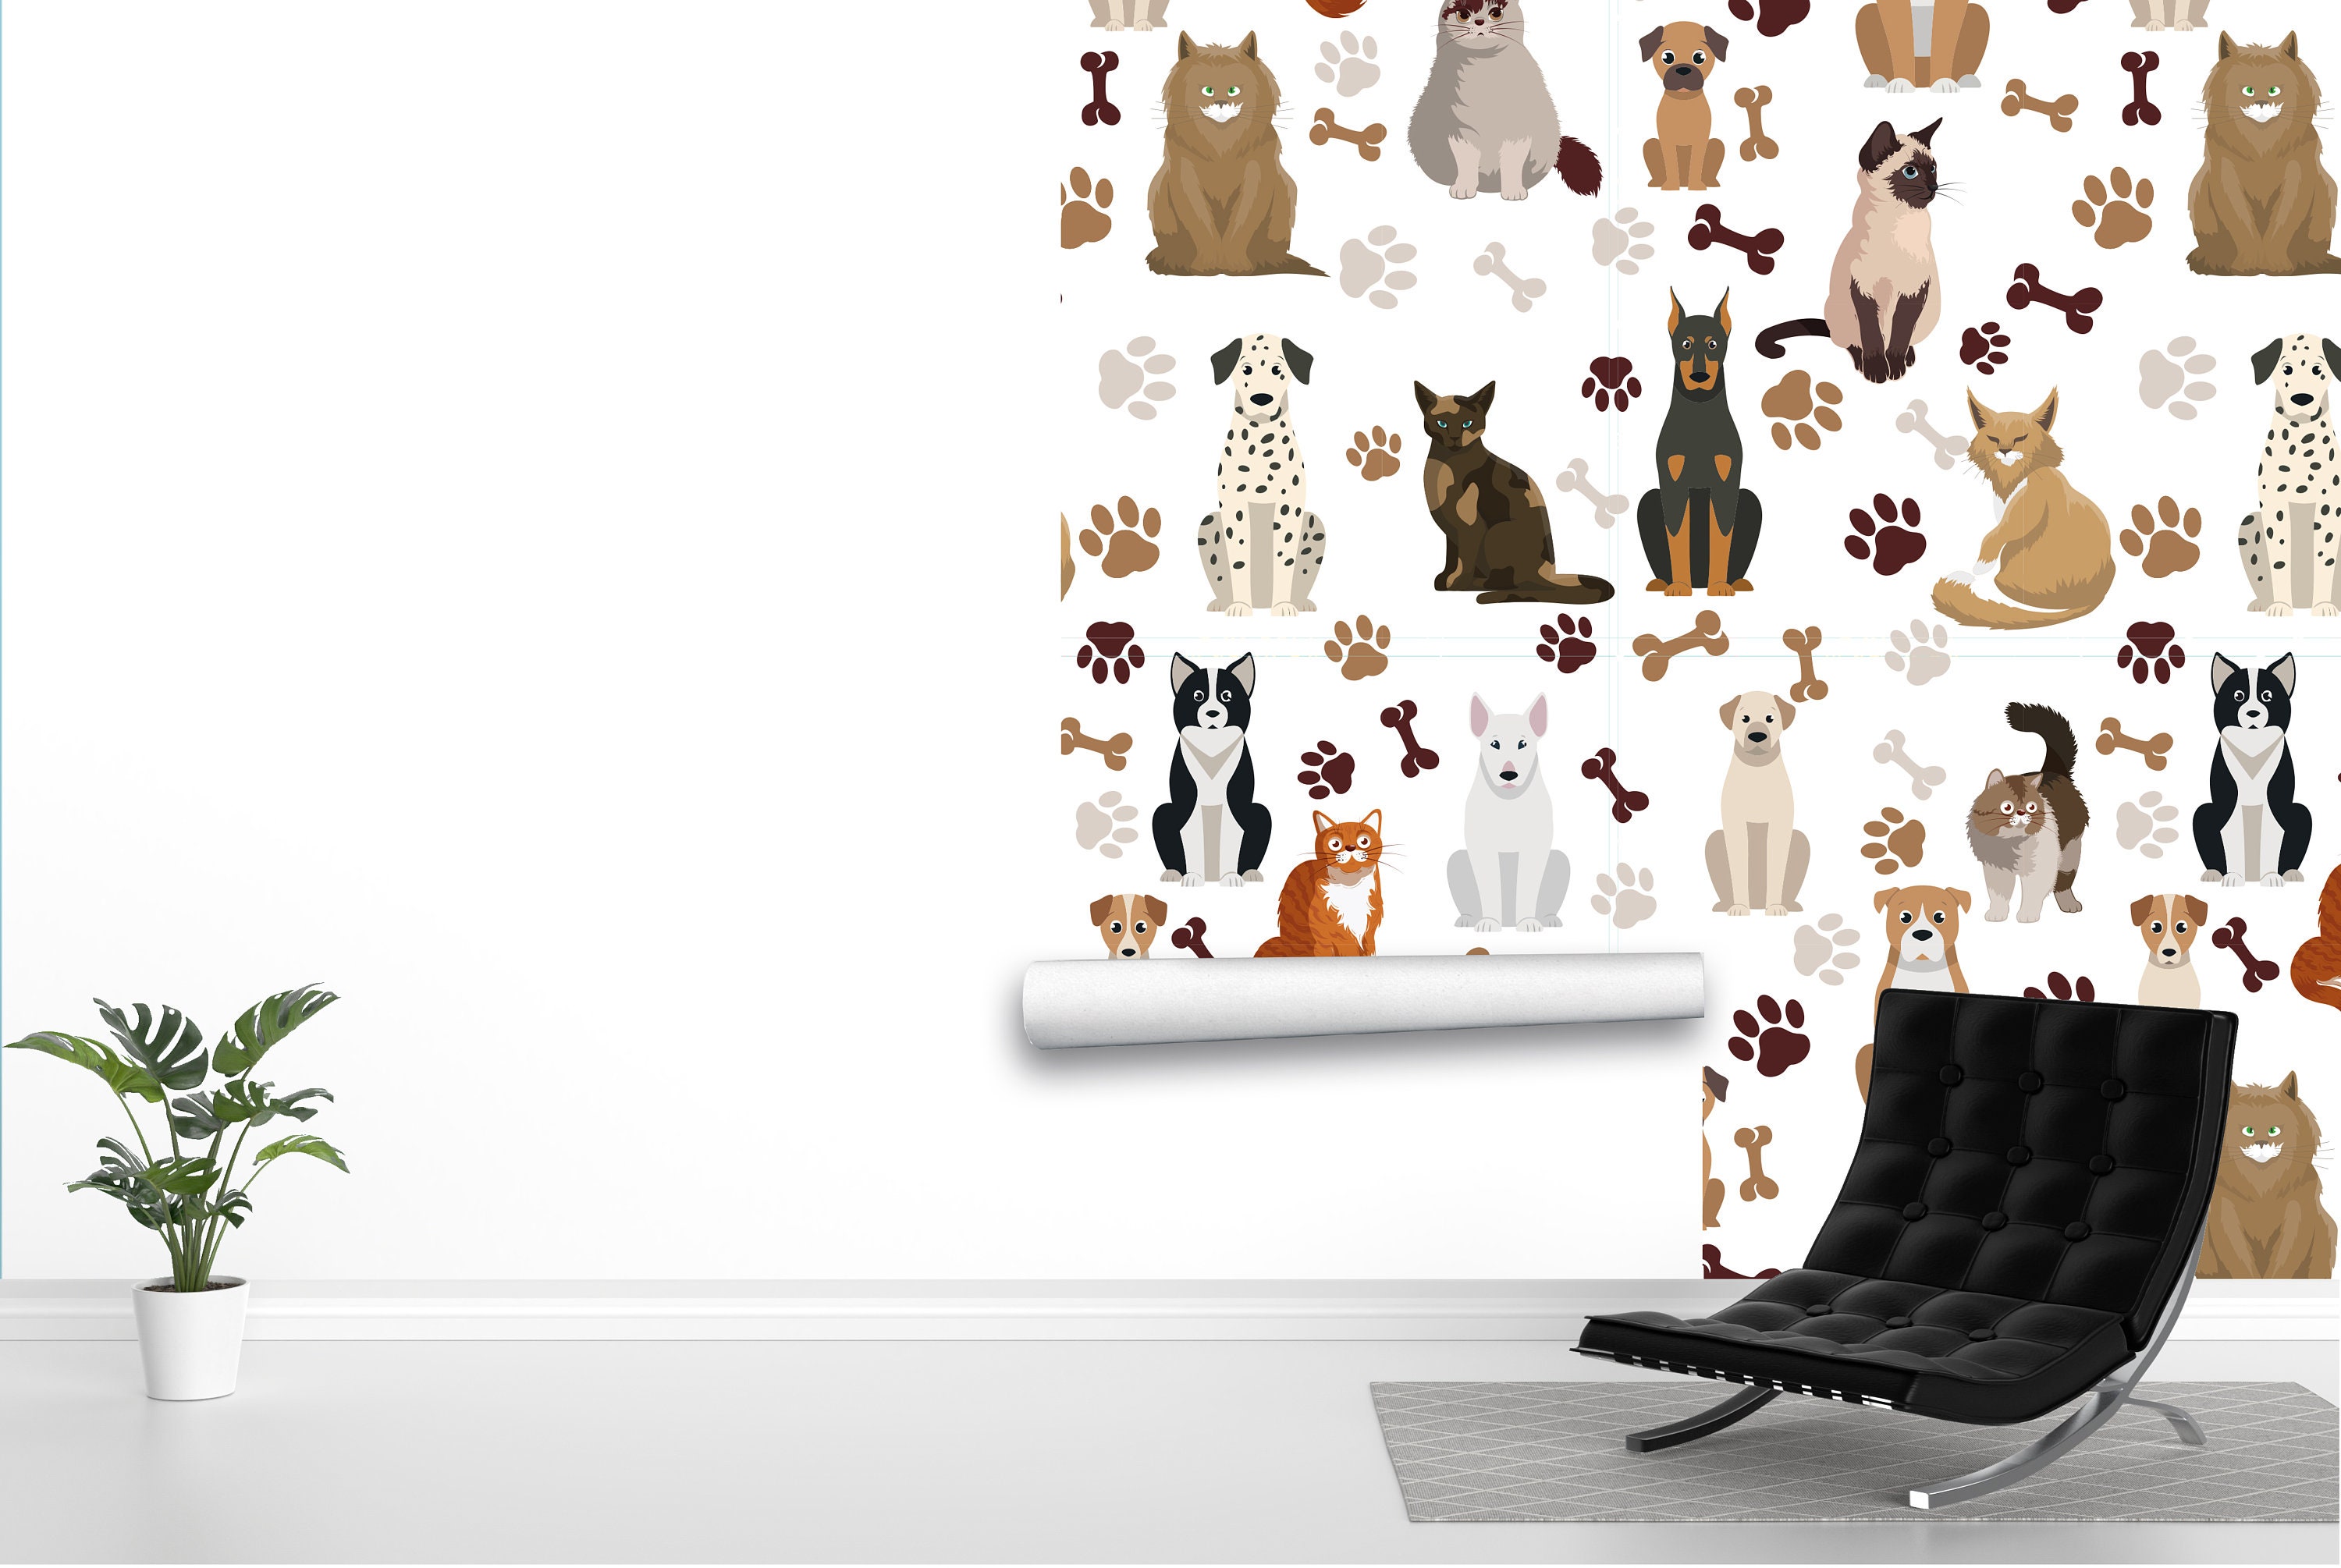 Cat and Dog Park Peel and Stick Removable Wall Decals Animal Theme (36-Piece Set) stk1111